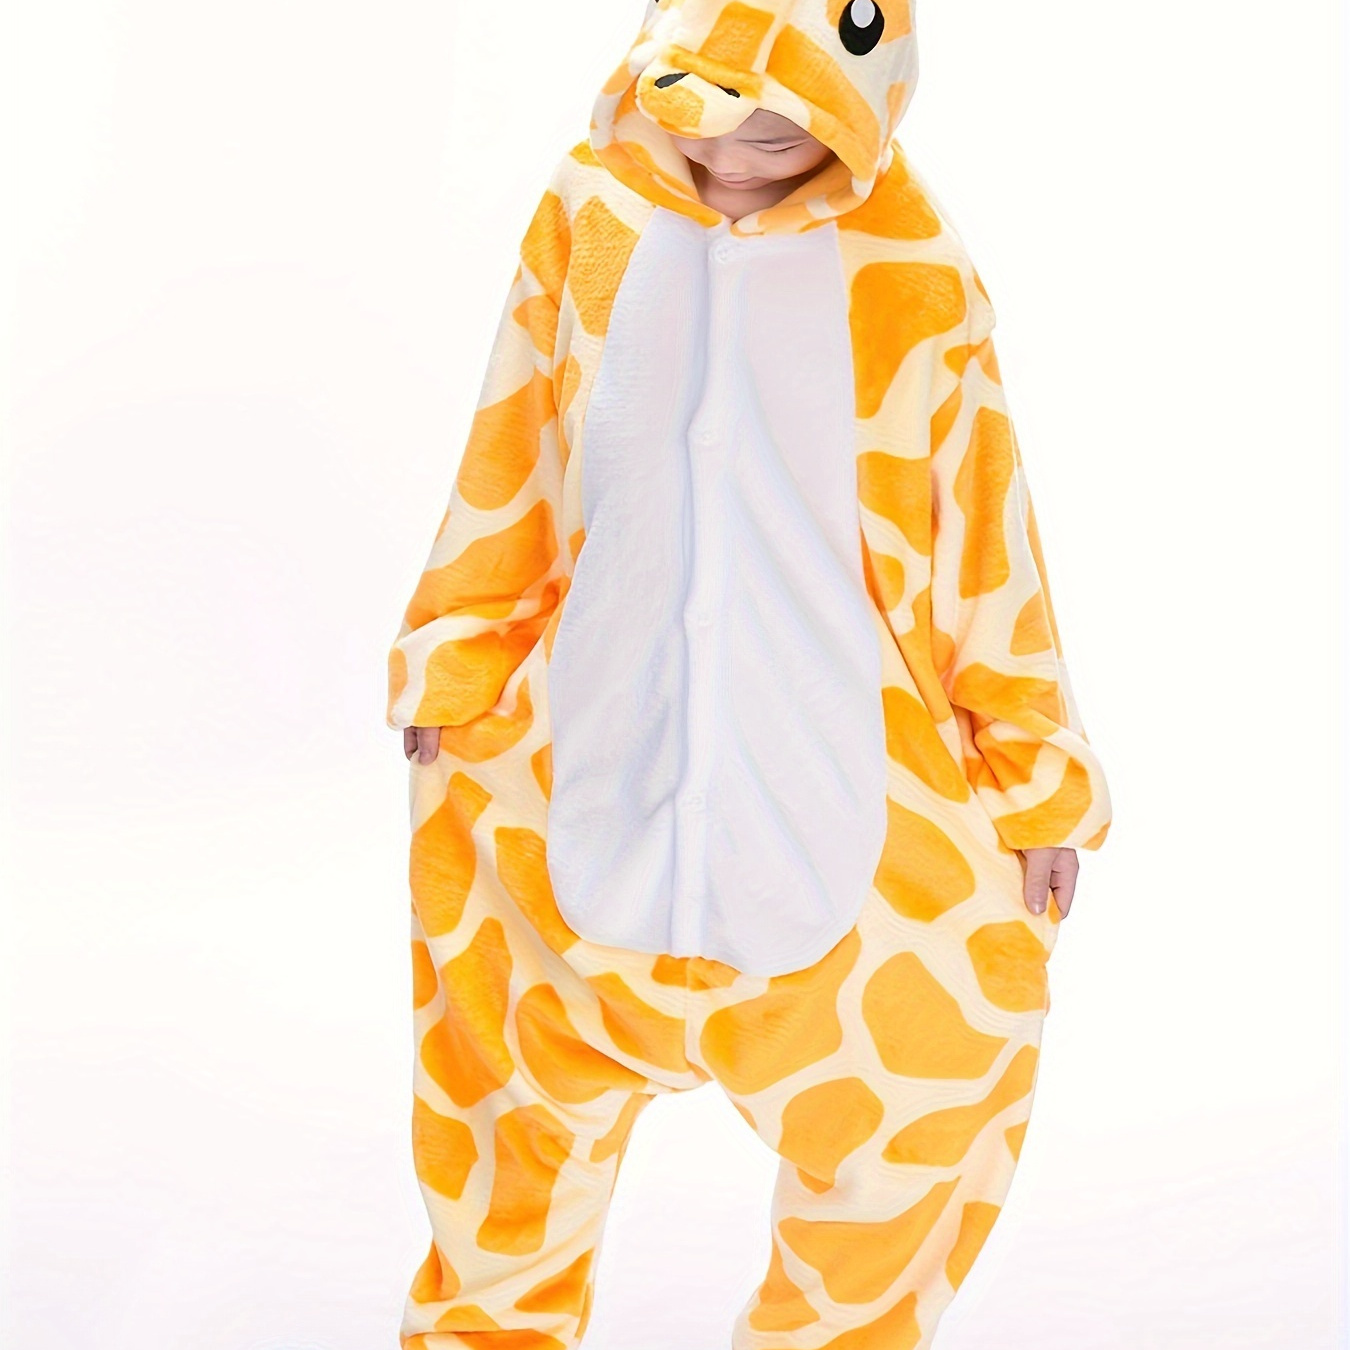 

Kid's Giraffe One-piece Clothing, Zip Up Hooded Romper, Flannel Cute Clothing For Boys & Girls